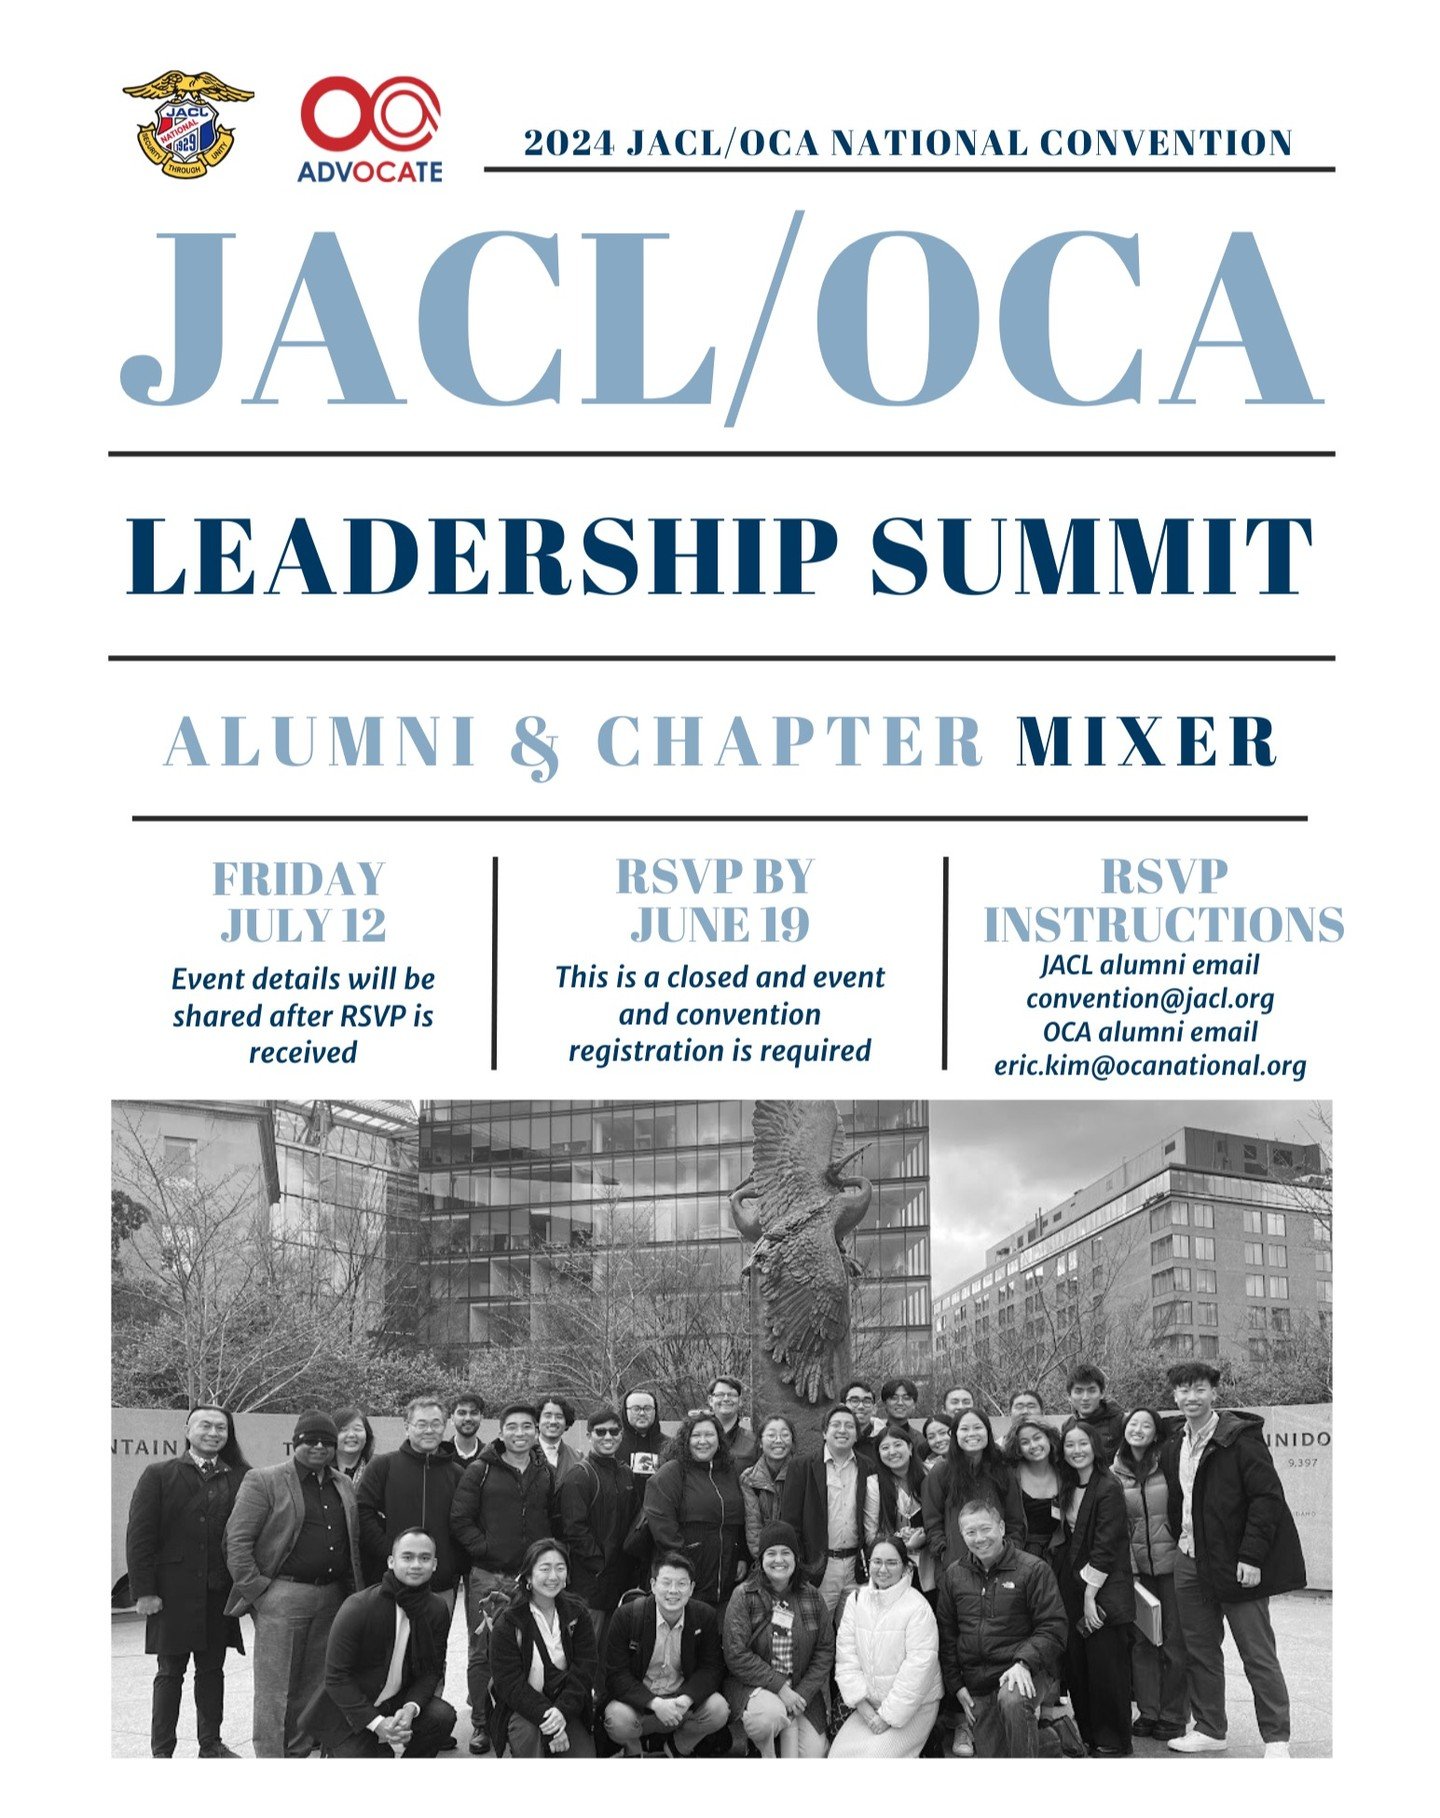 Calling all JACL/OCA Leadership Summit Alumni! We are having an Alumni Mixer on July 12th at this year's National Convention! This is an opportunity for both JACL and OCA Leadership Summit alumni to reconnect with each other and both organizations as